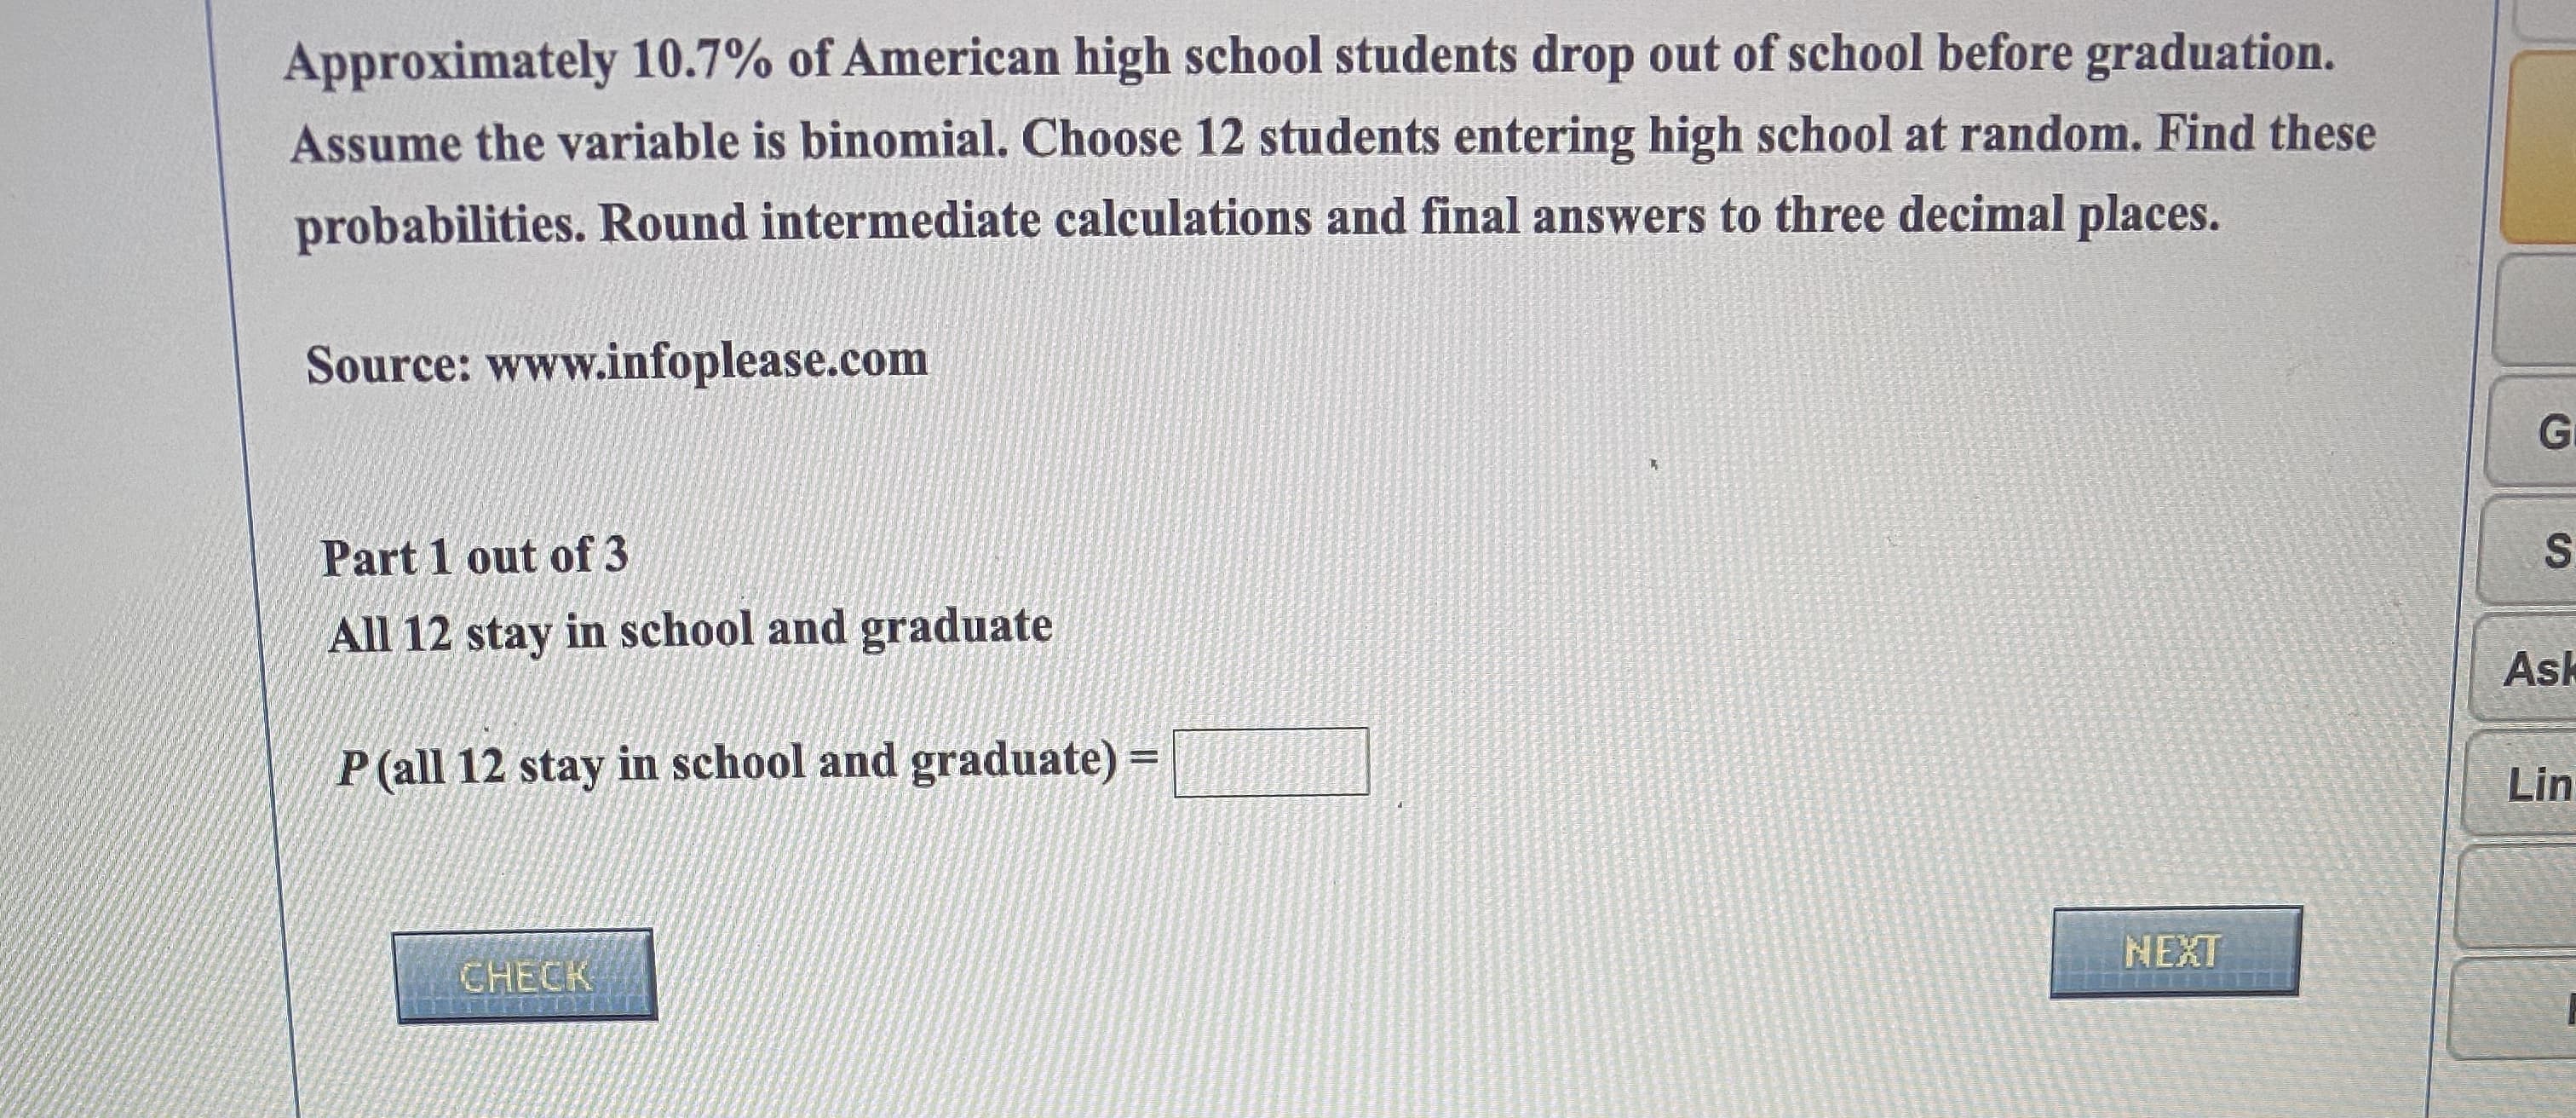 Approximately 10.7% of American high school students drop out of school before graduation.
Assume the variable is binomial. Choose 12 students entering high school at random. Find these
probabilities. Round intermediate calculations and final answers to three decimal places.
Source: www.infoplease.com
Part 1 out of 3
All 12 stay in school and graduate
P (all 12 stay in school and graduate) =
